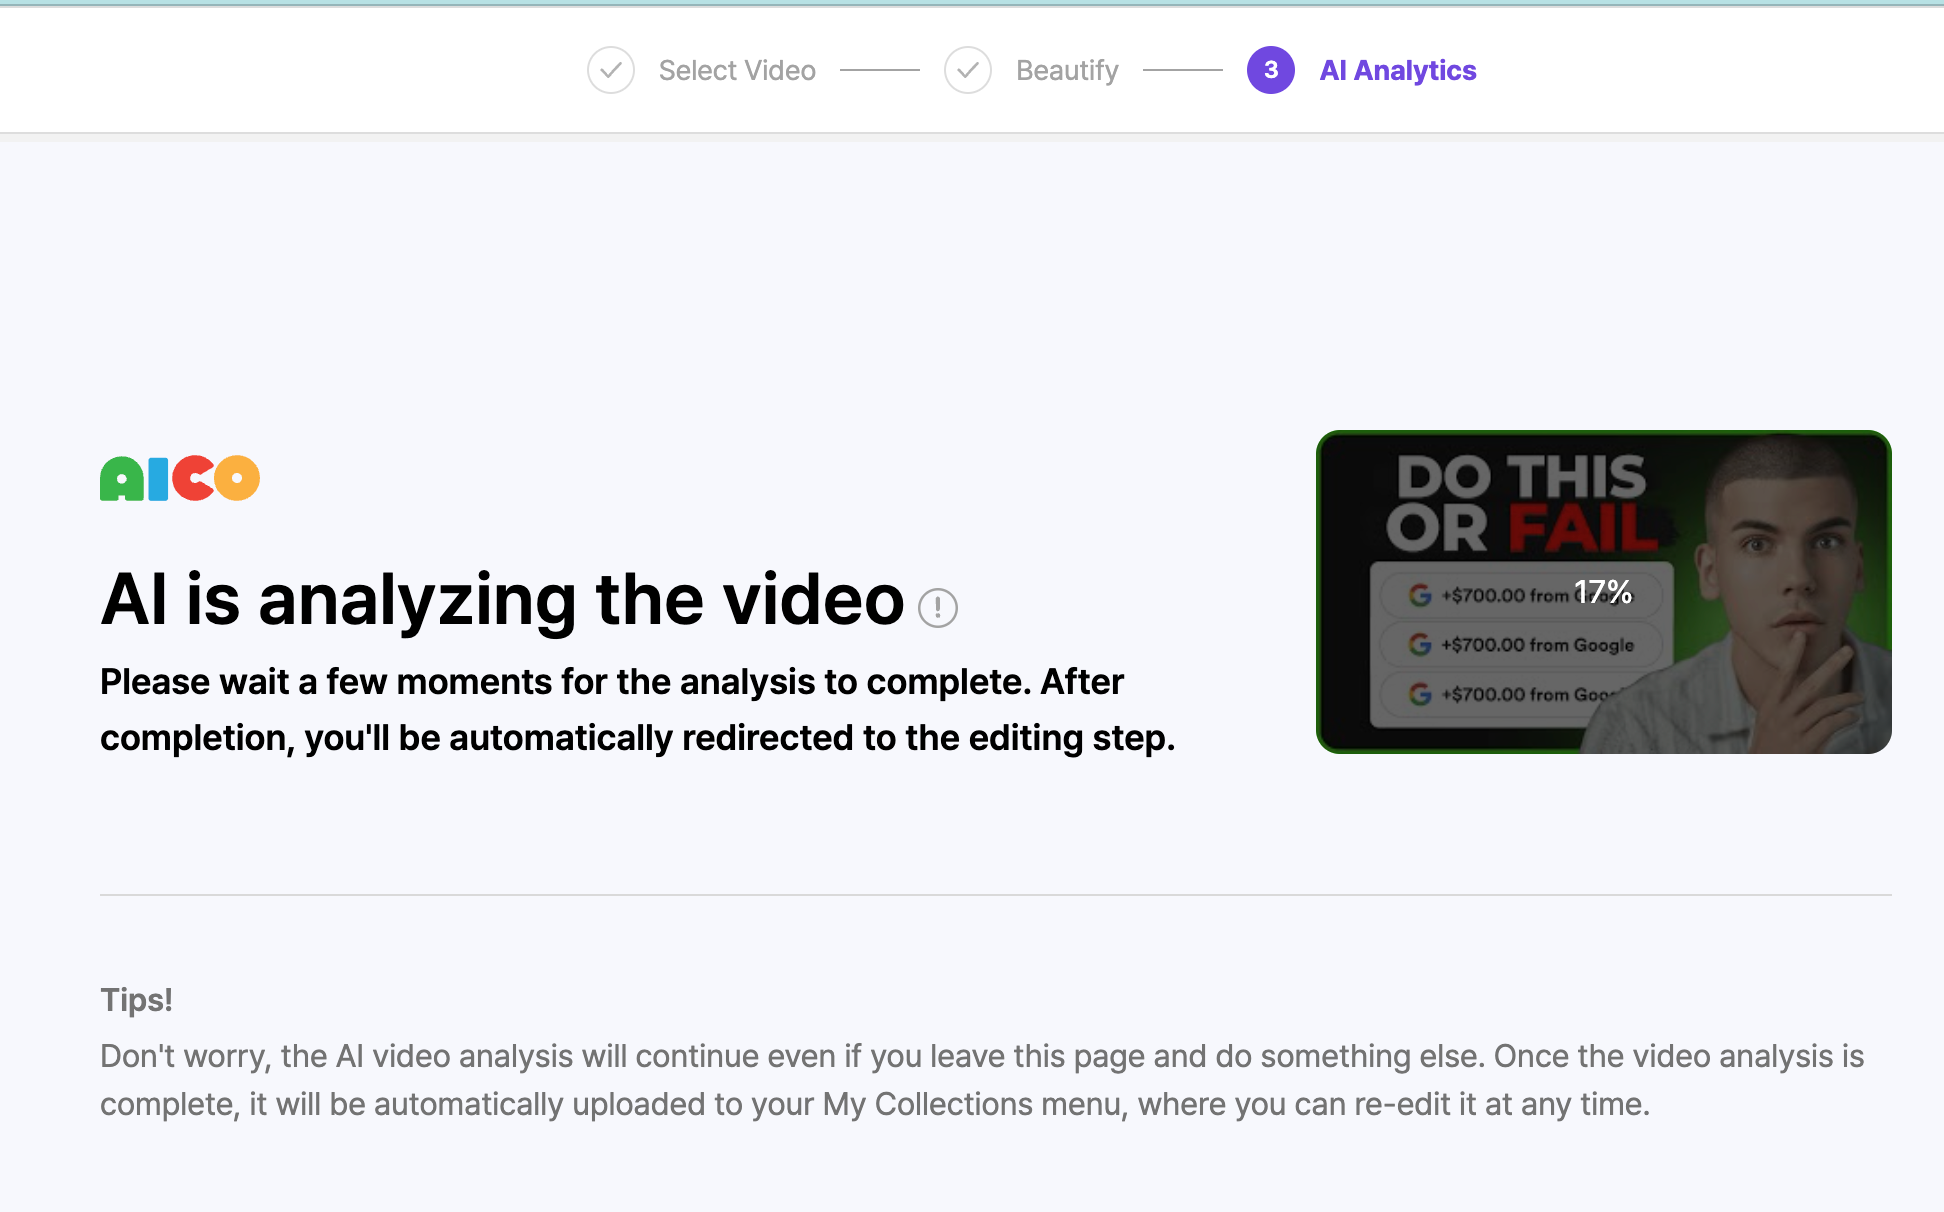 AICO - Insert a youtube URL and automatically convert it to a Shorts video